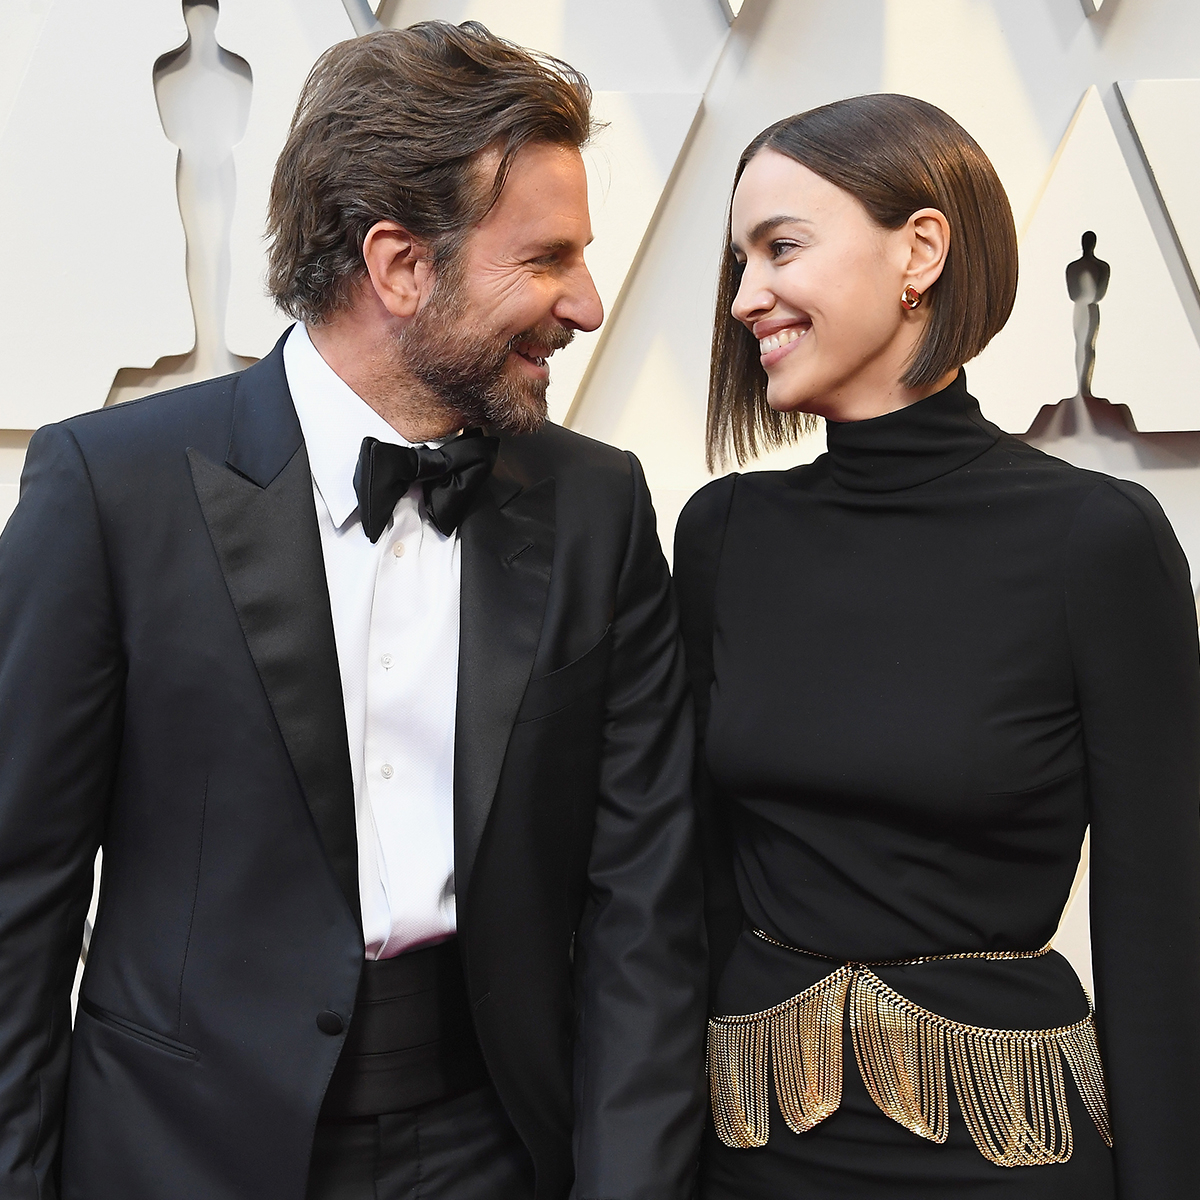 See Exes Bradley Cooper and Irina Shayk Reunite for Tropical Vacation